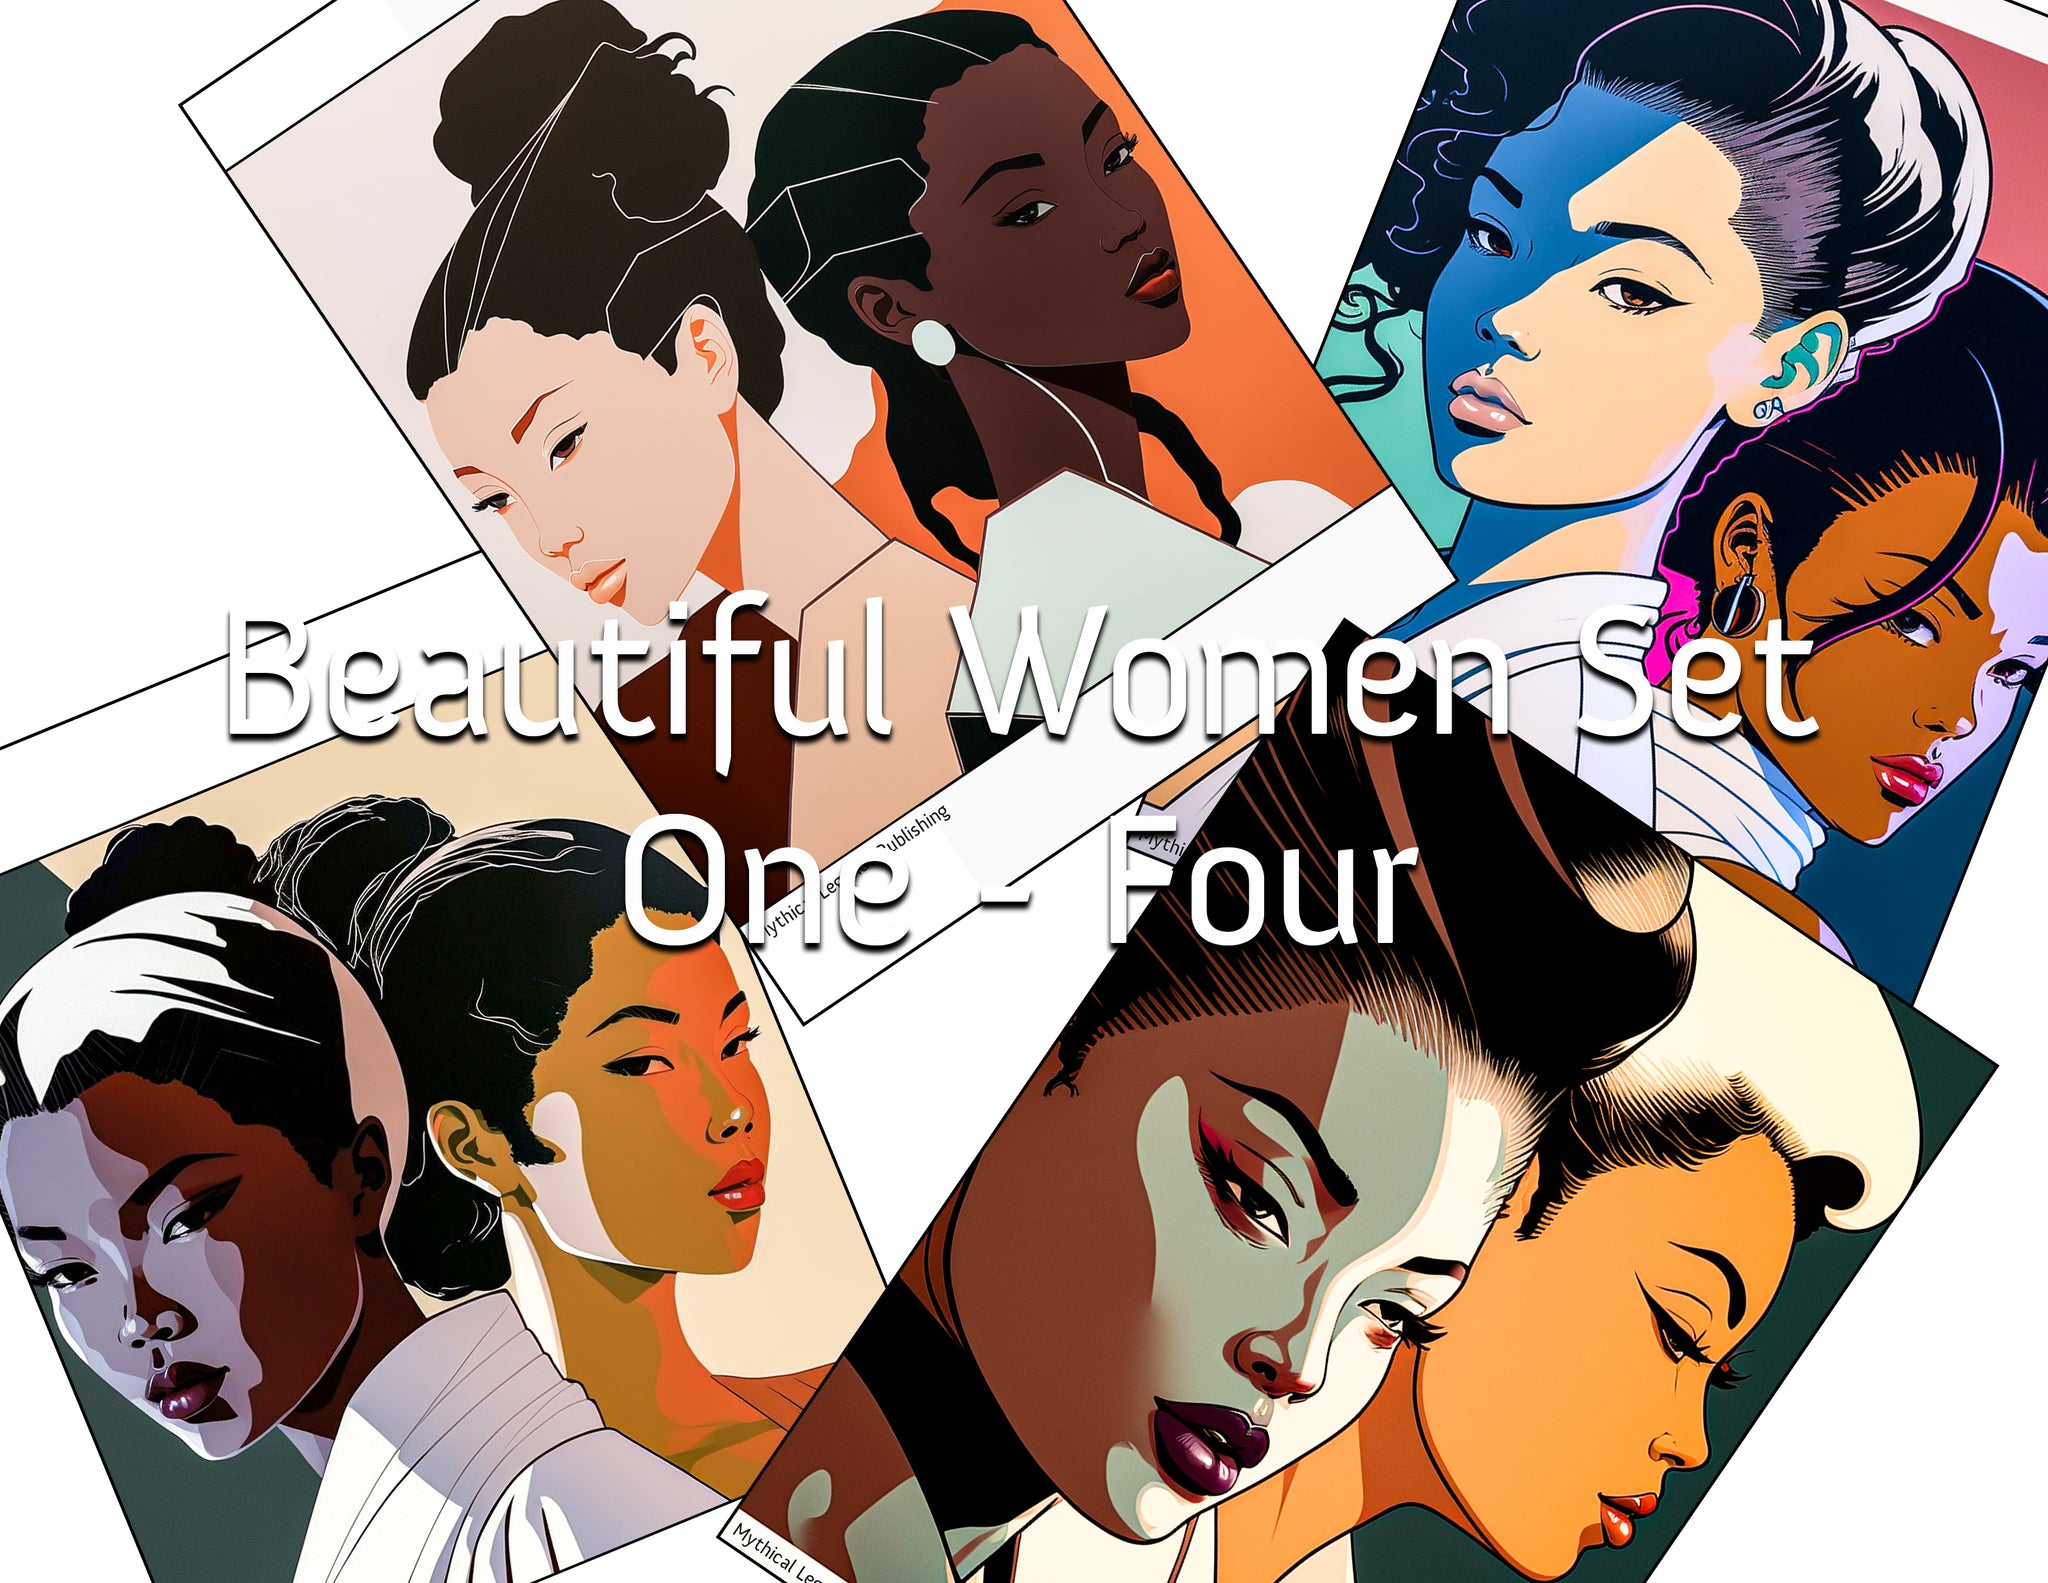 Printable Greeting Card - Two Beautiful Women One - Four Set